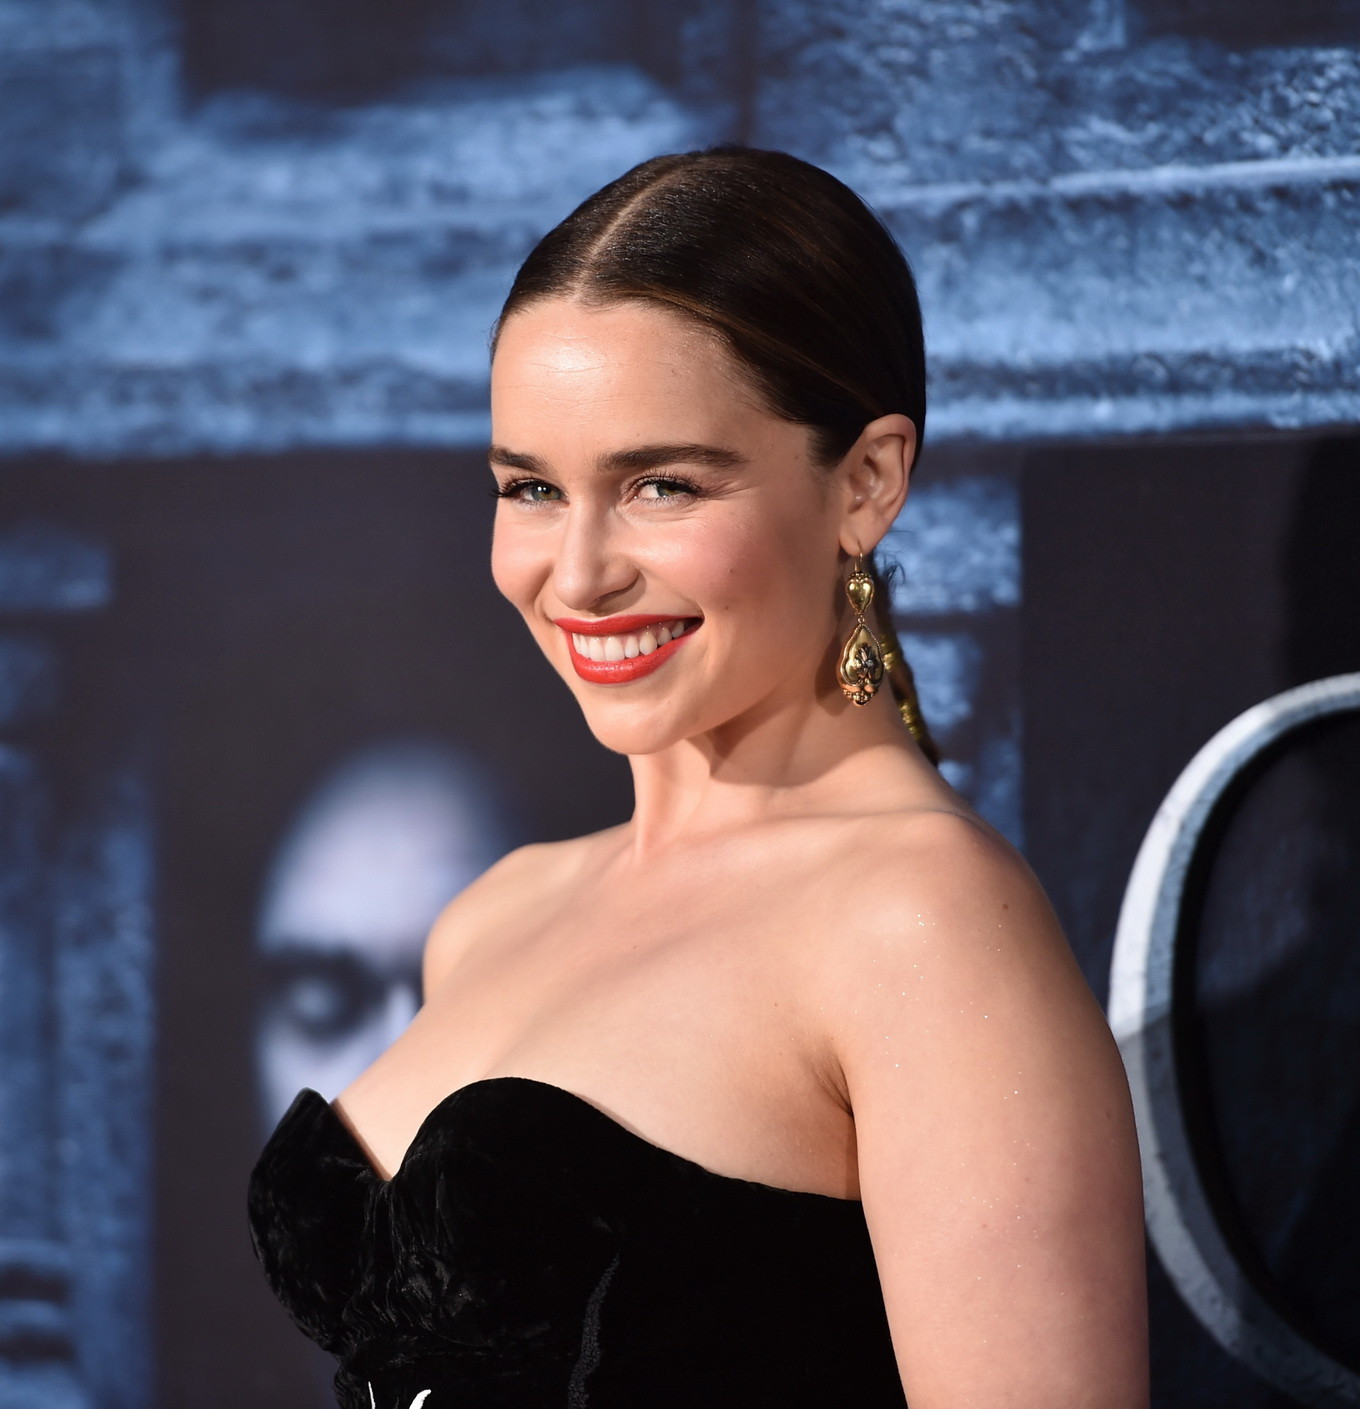 Emilia Clarke shows off her big boobs in a strapless dress #75143783